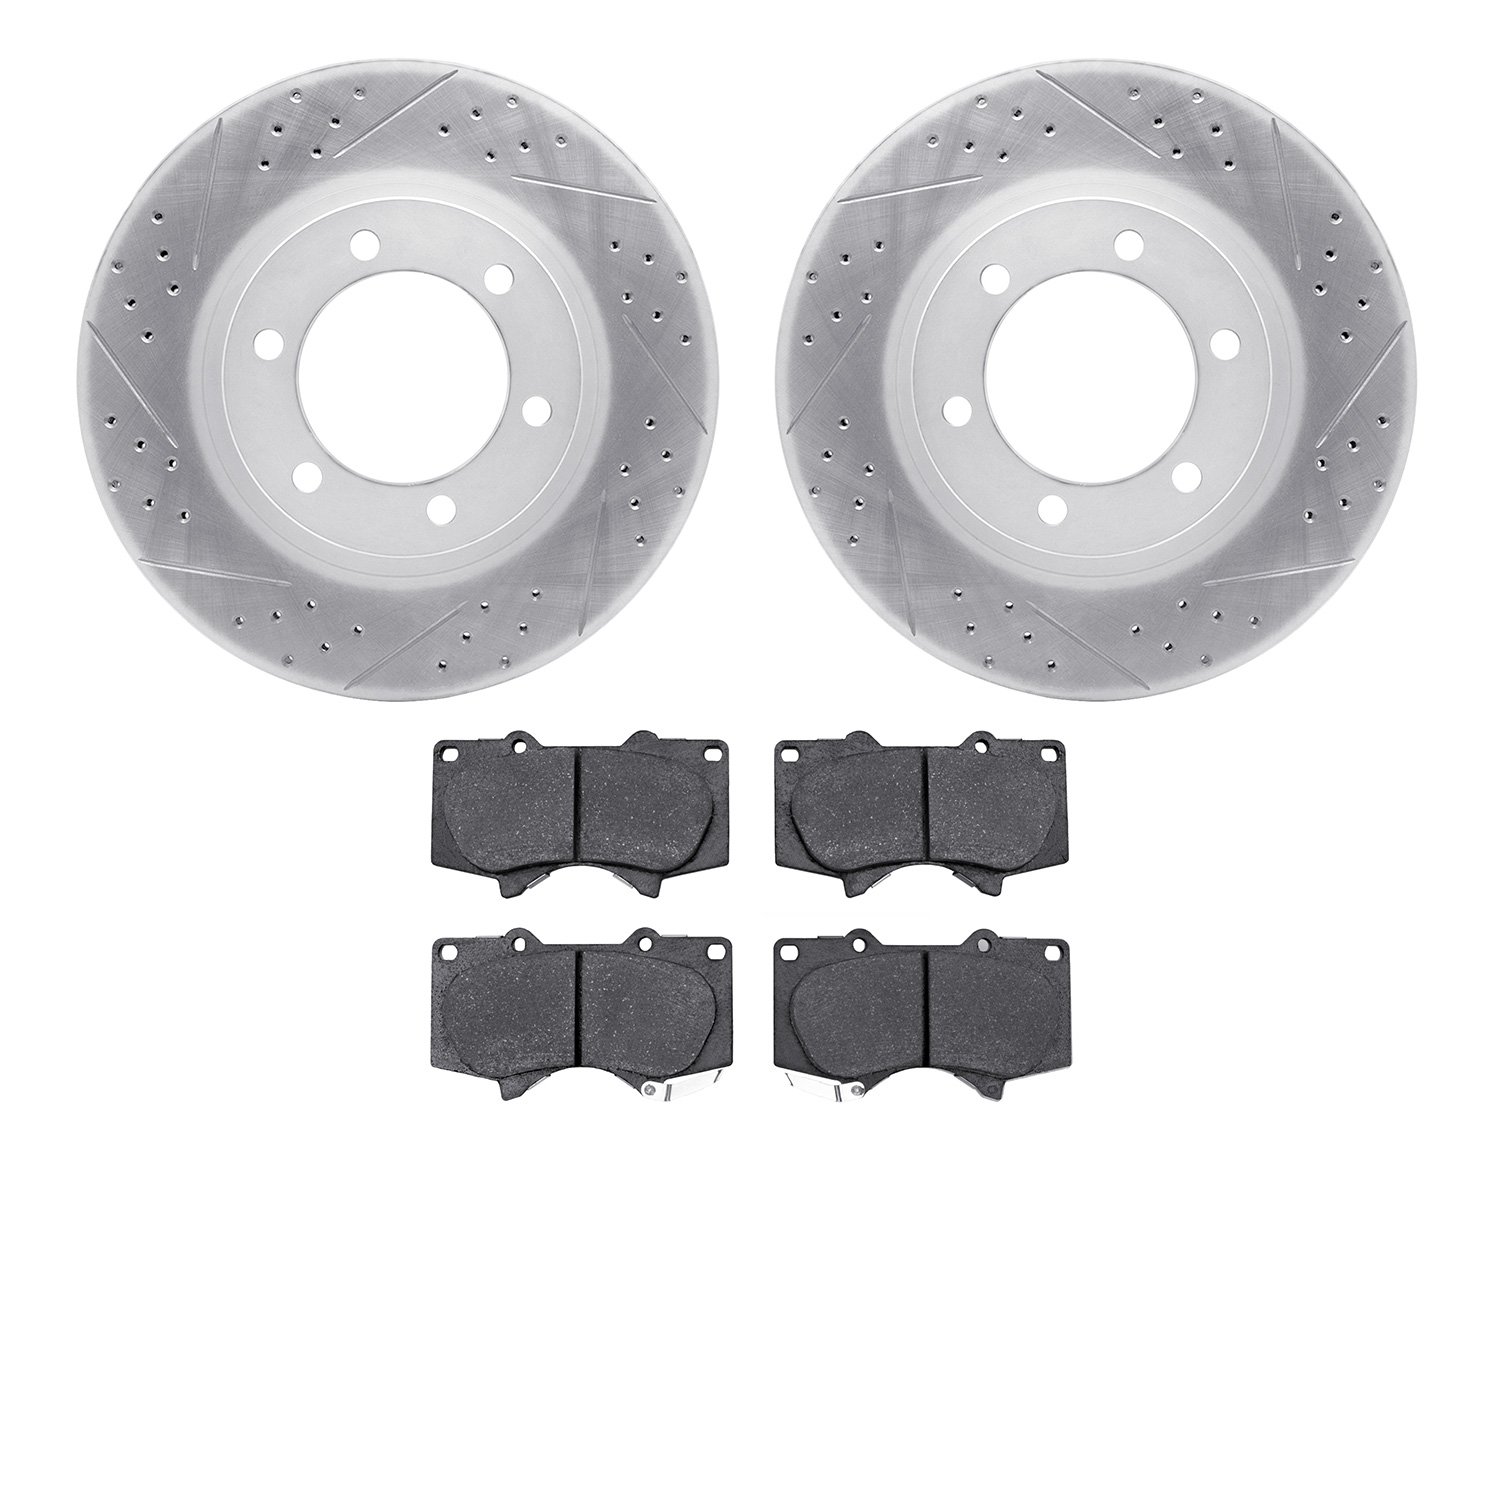 2402-76009 Geoperformance Drilled/Slotted Brake Rotors with Ultimate-Duty Brake Pads Kit, 2003-2009 Lexus/Toyota/Scion, Position